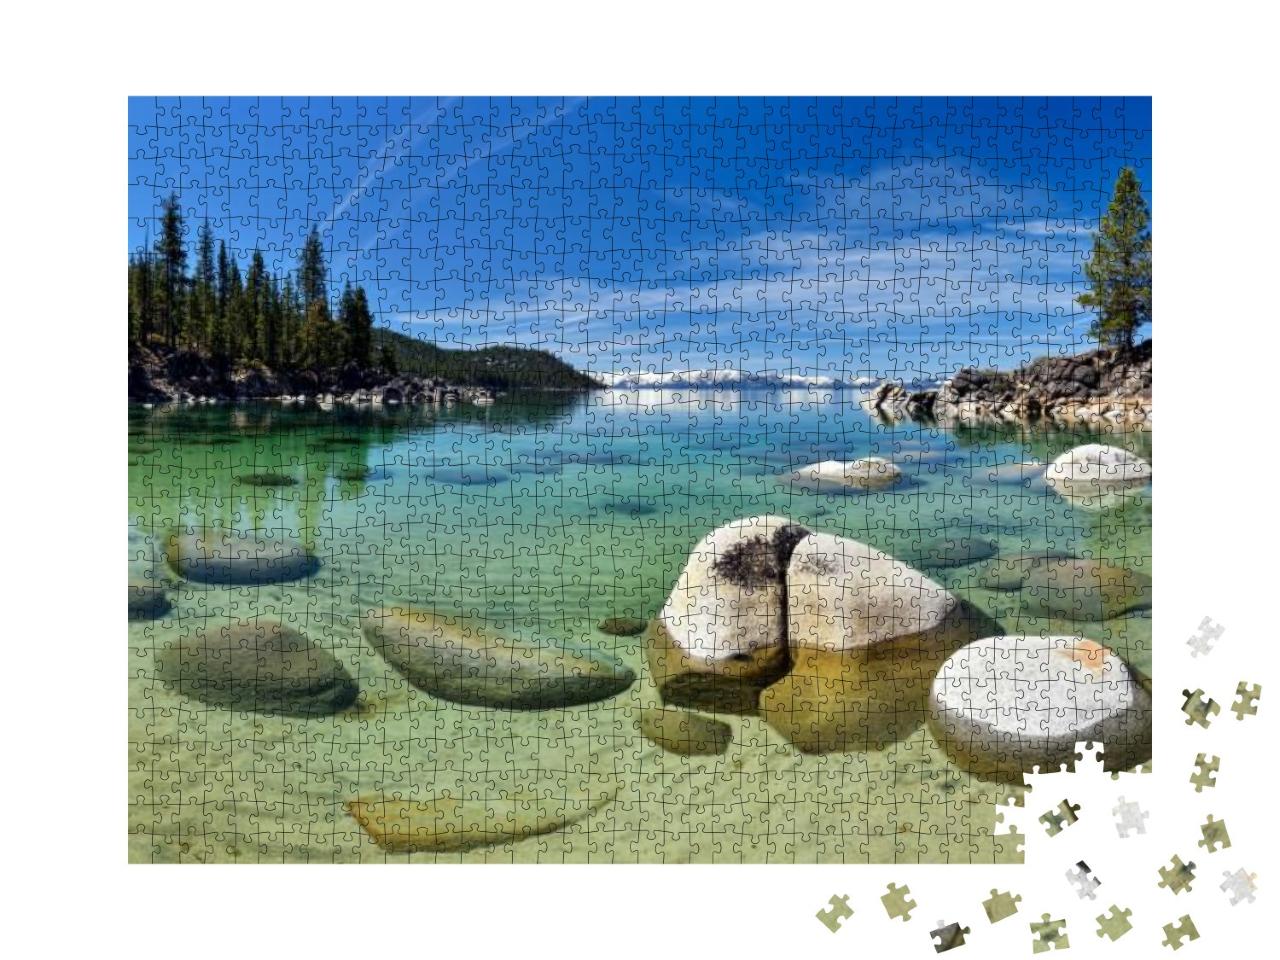 Beautiful Panorama on the Beach of Secret Cove, Lake Taho... Jigsaw Puzzle with 1000 pieces